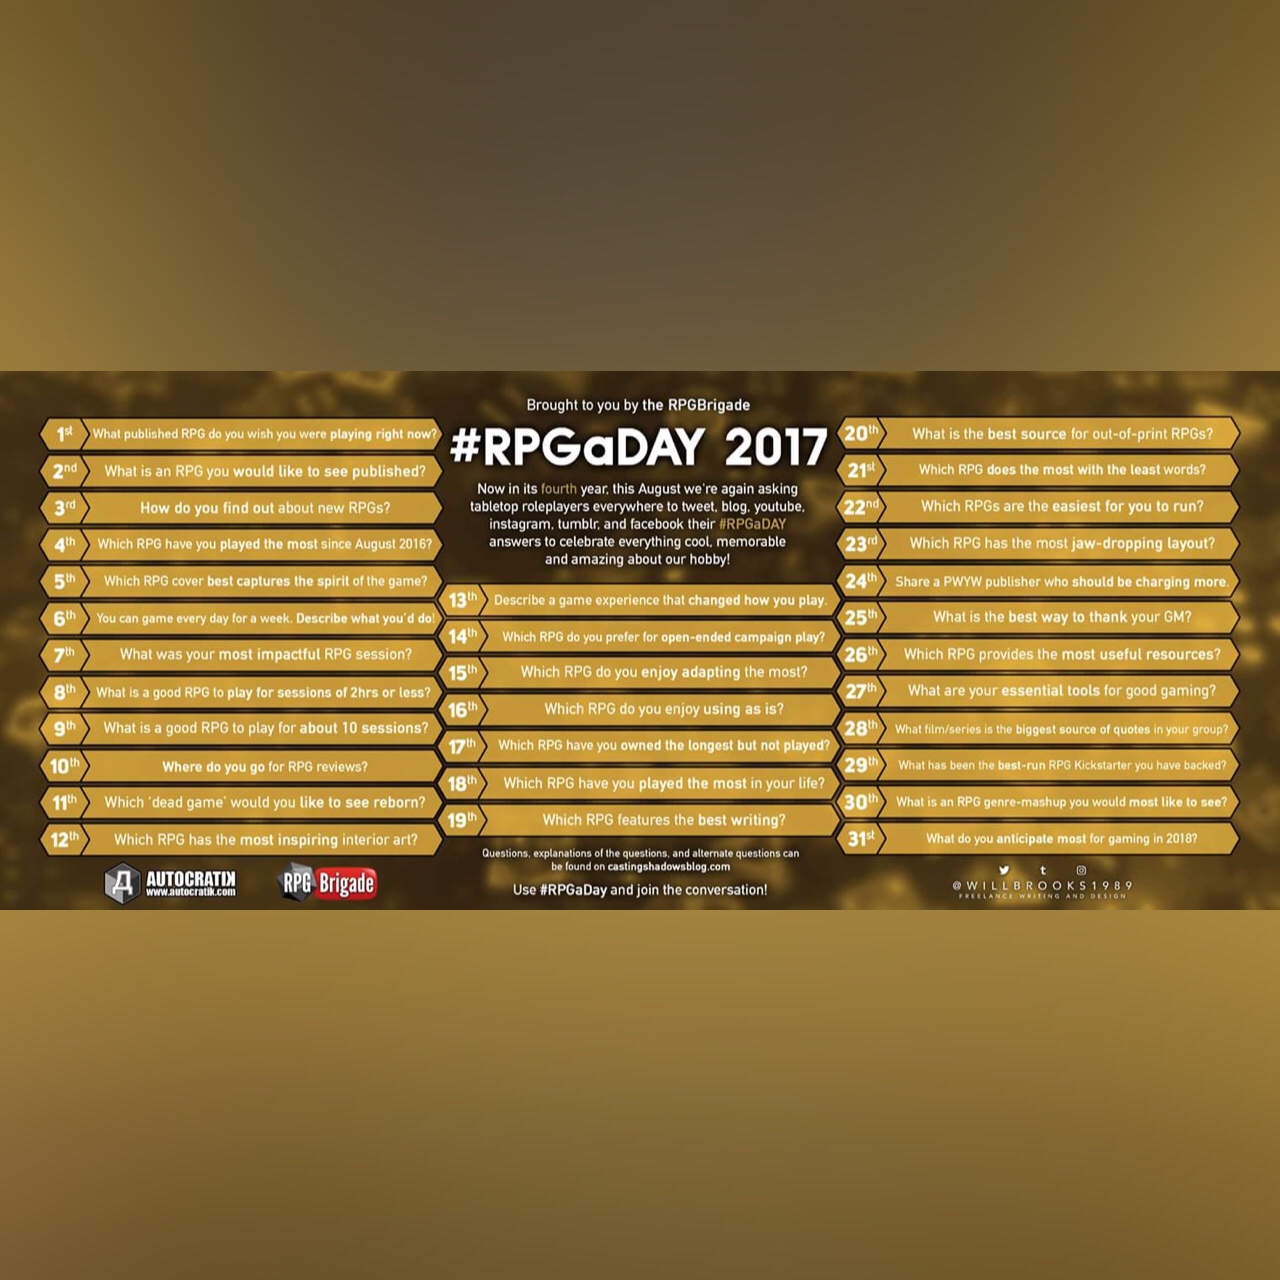 RPGaDAY 2017 August 21st What RPG does the most with the least amount of words?